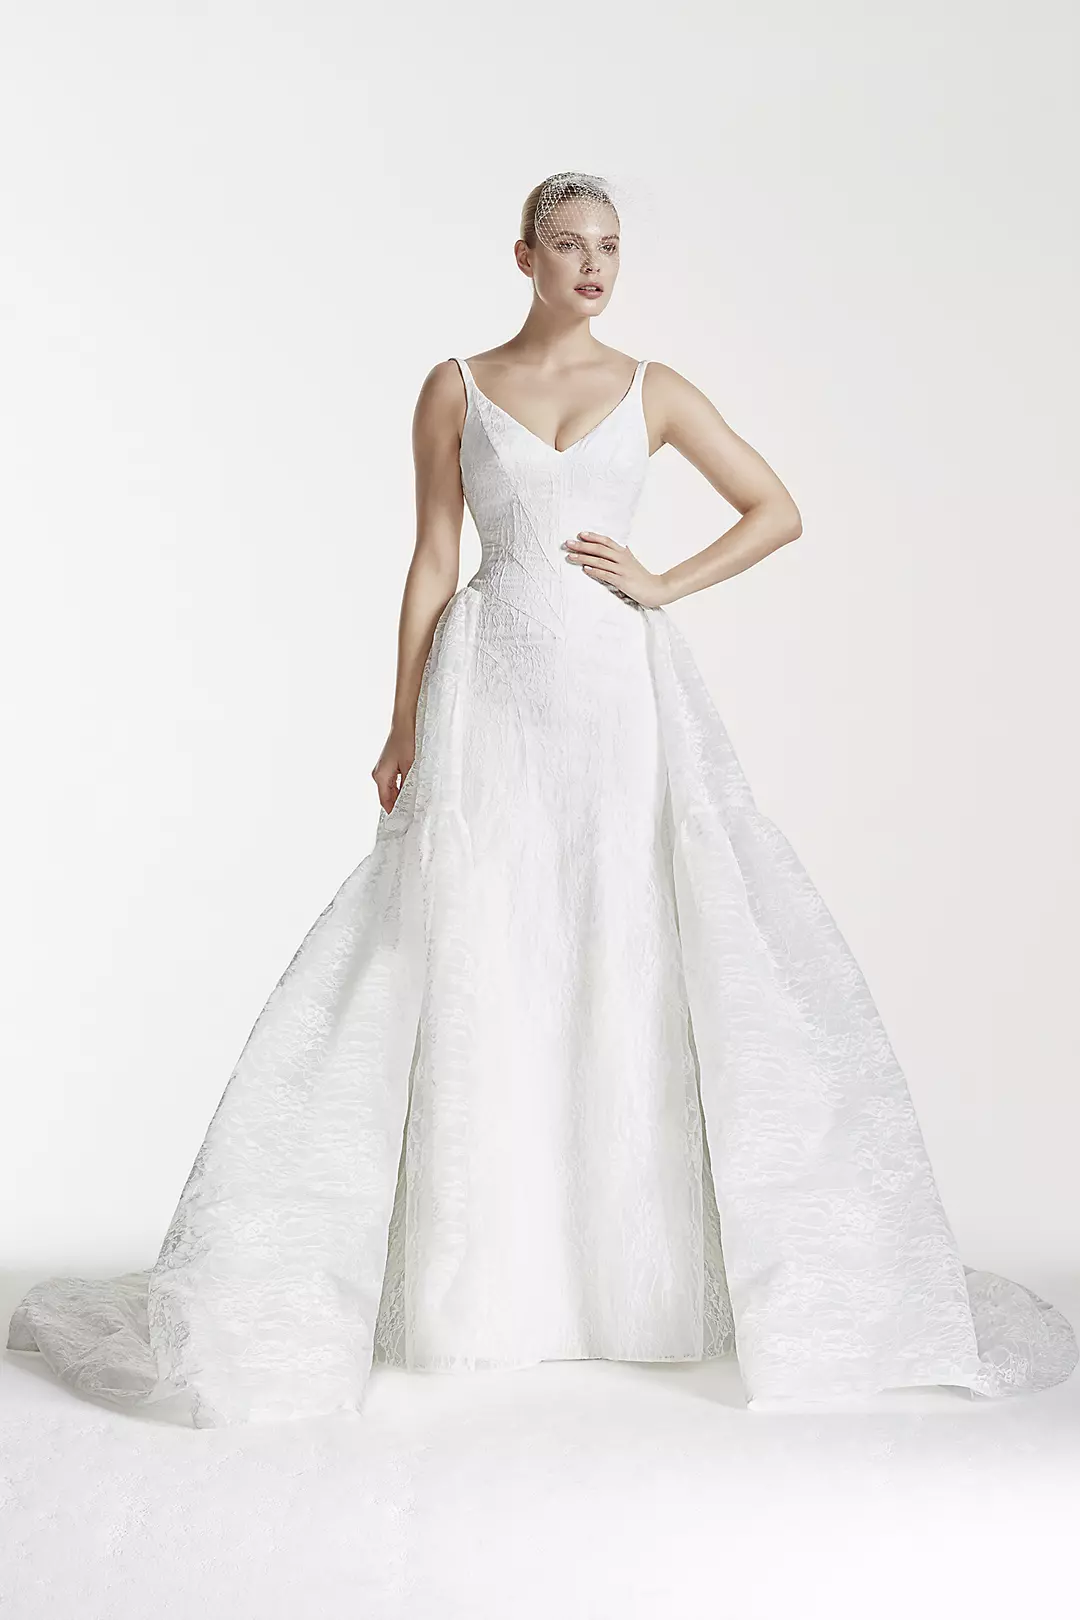 As-Is Tank Bonded Organza and Lace Wedding Dress Image